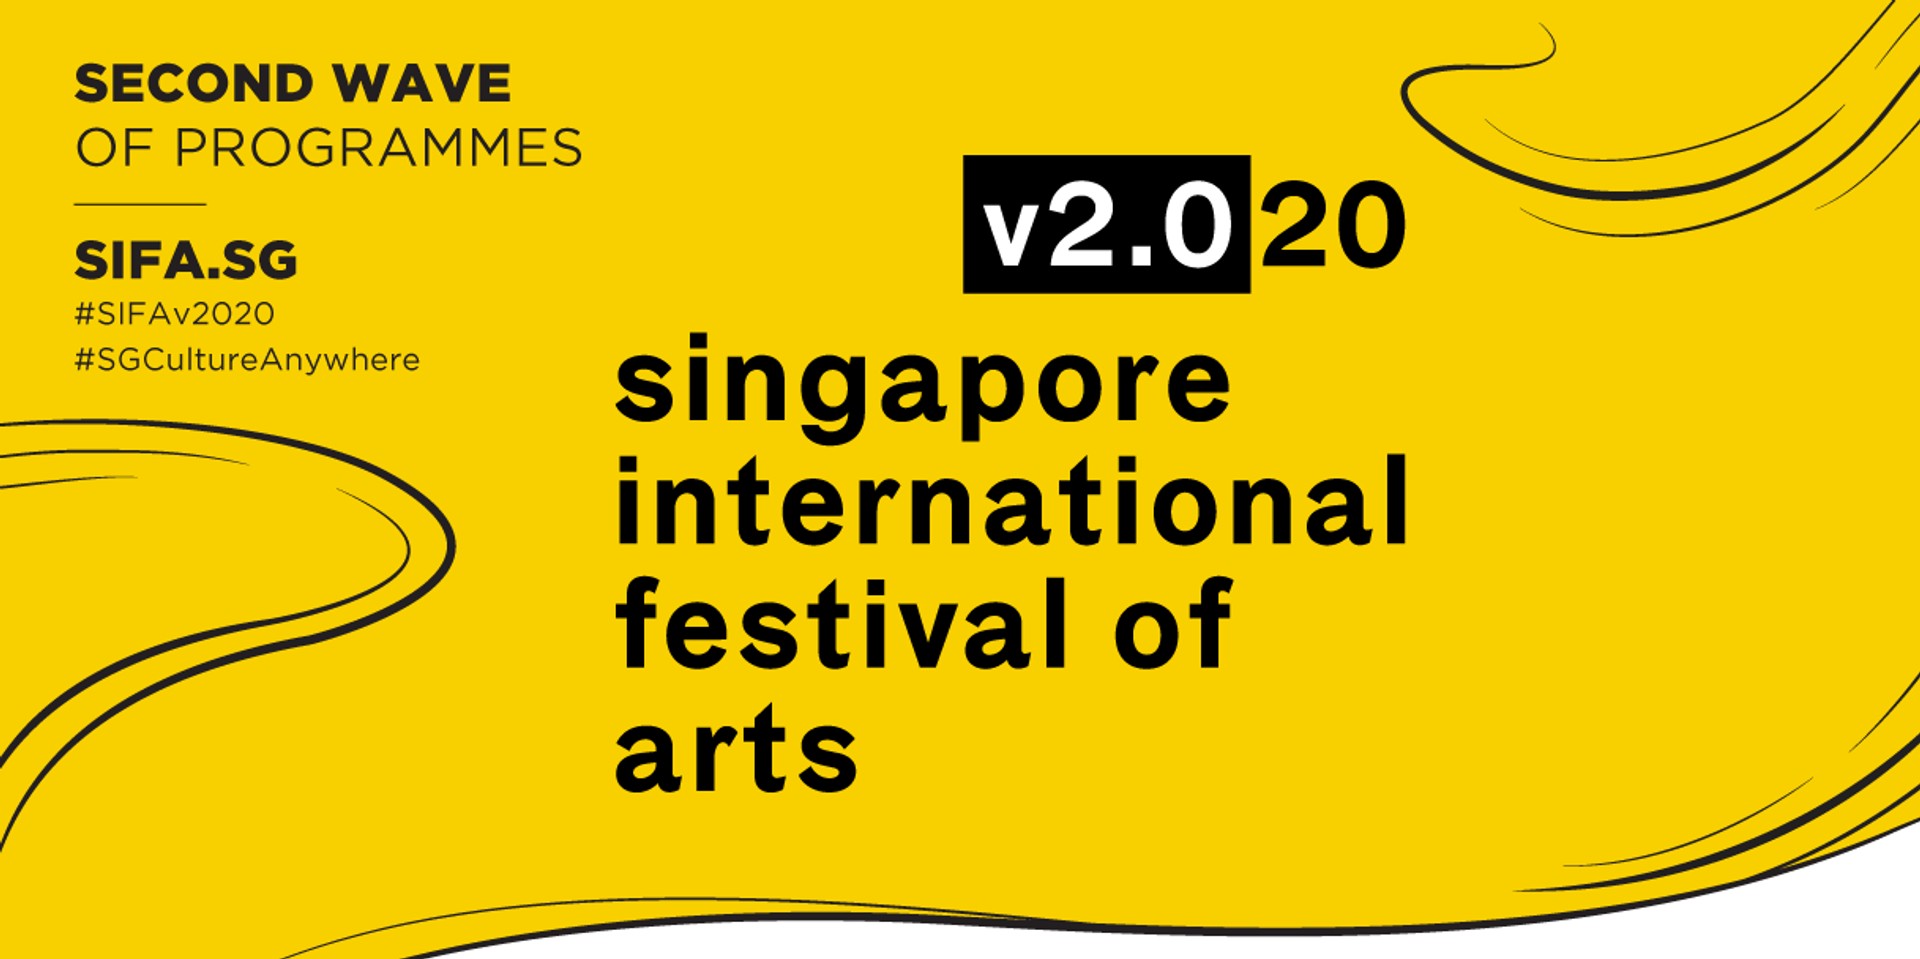 Singapore’s international festival of the arts, SIFA v2.020, returns with programmes and artists for October to December revealed